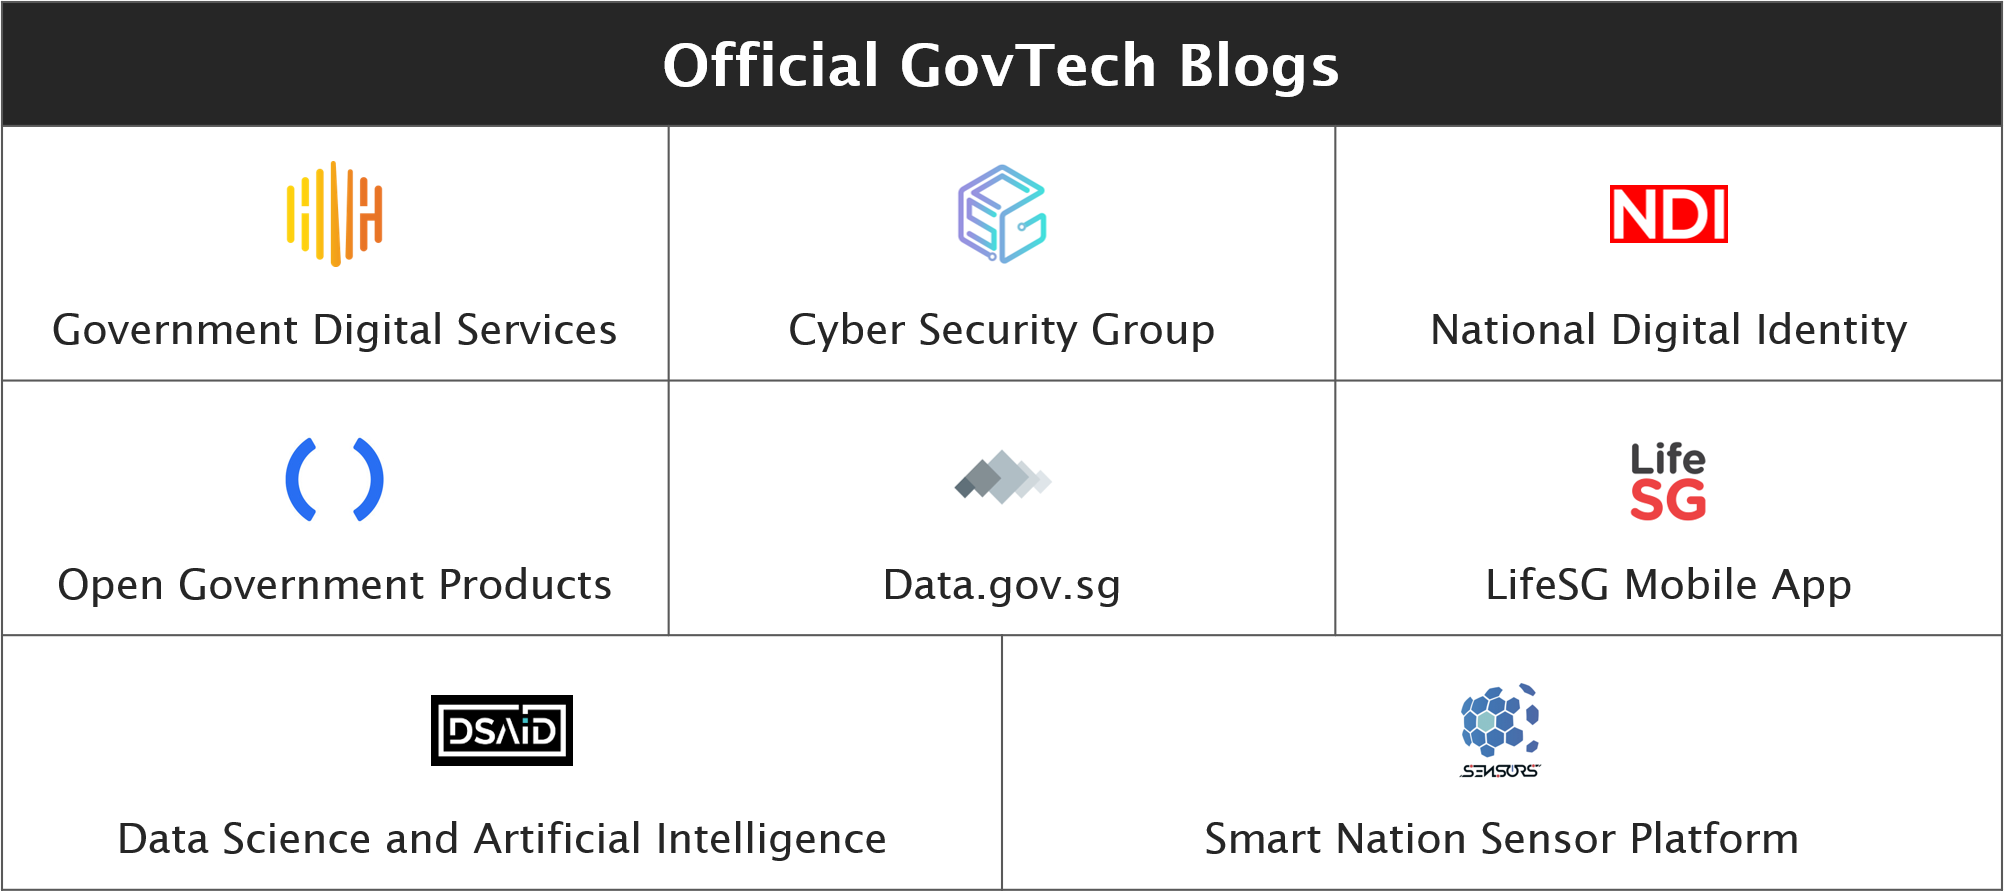 Official GovTech blogs from the different divisions.